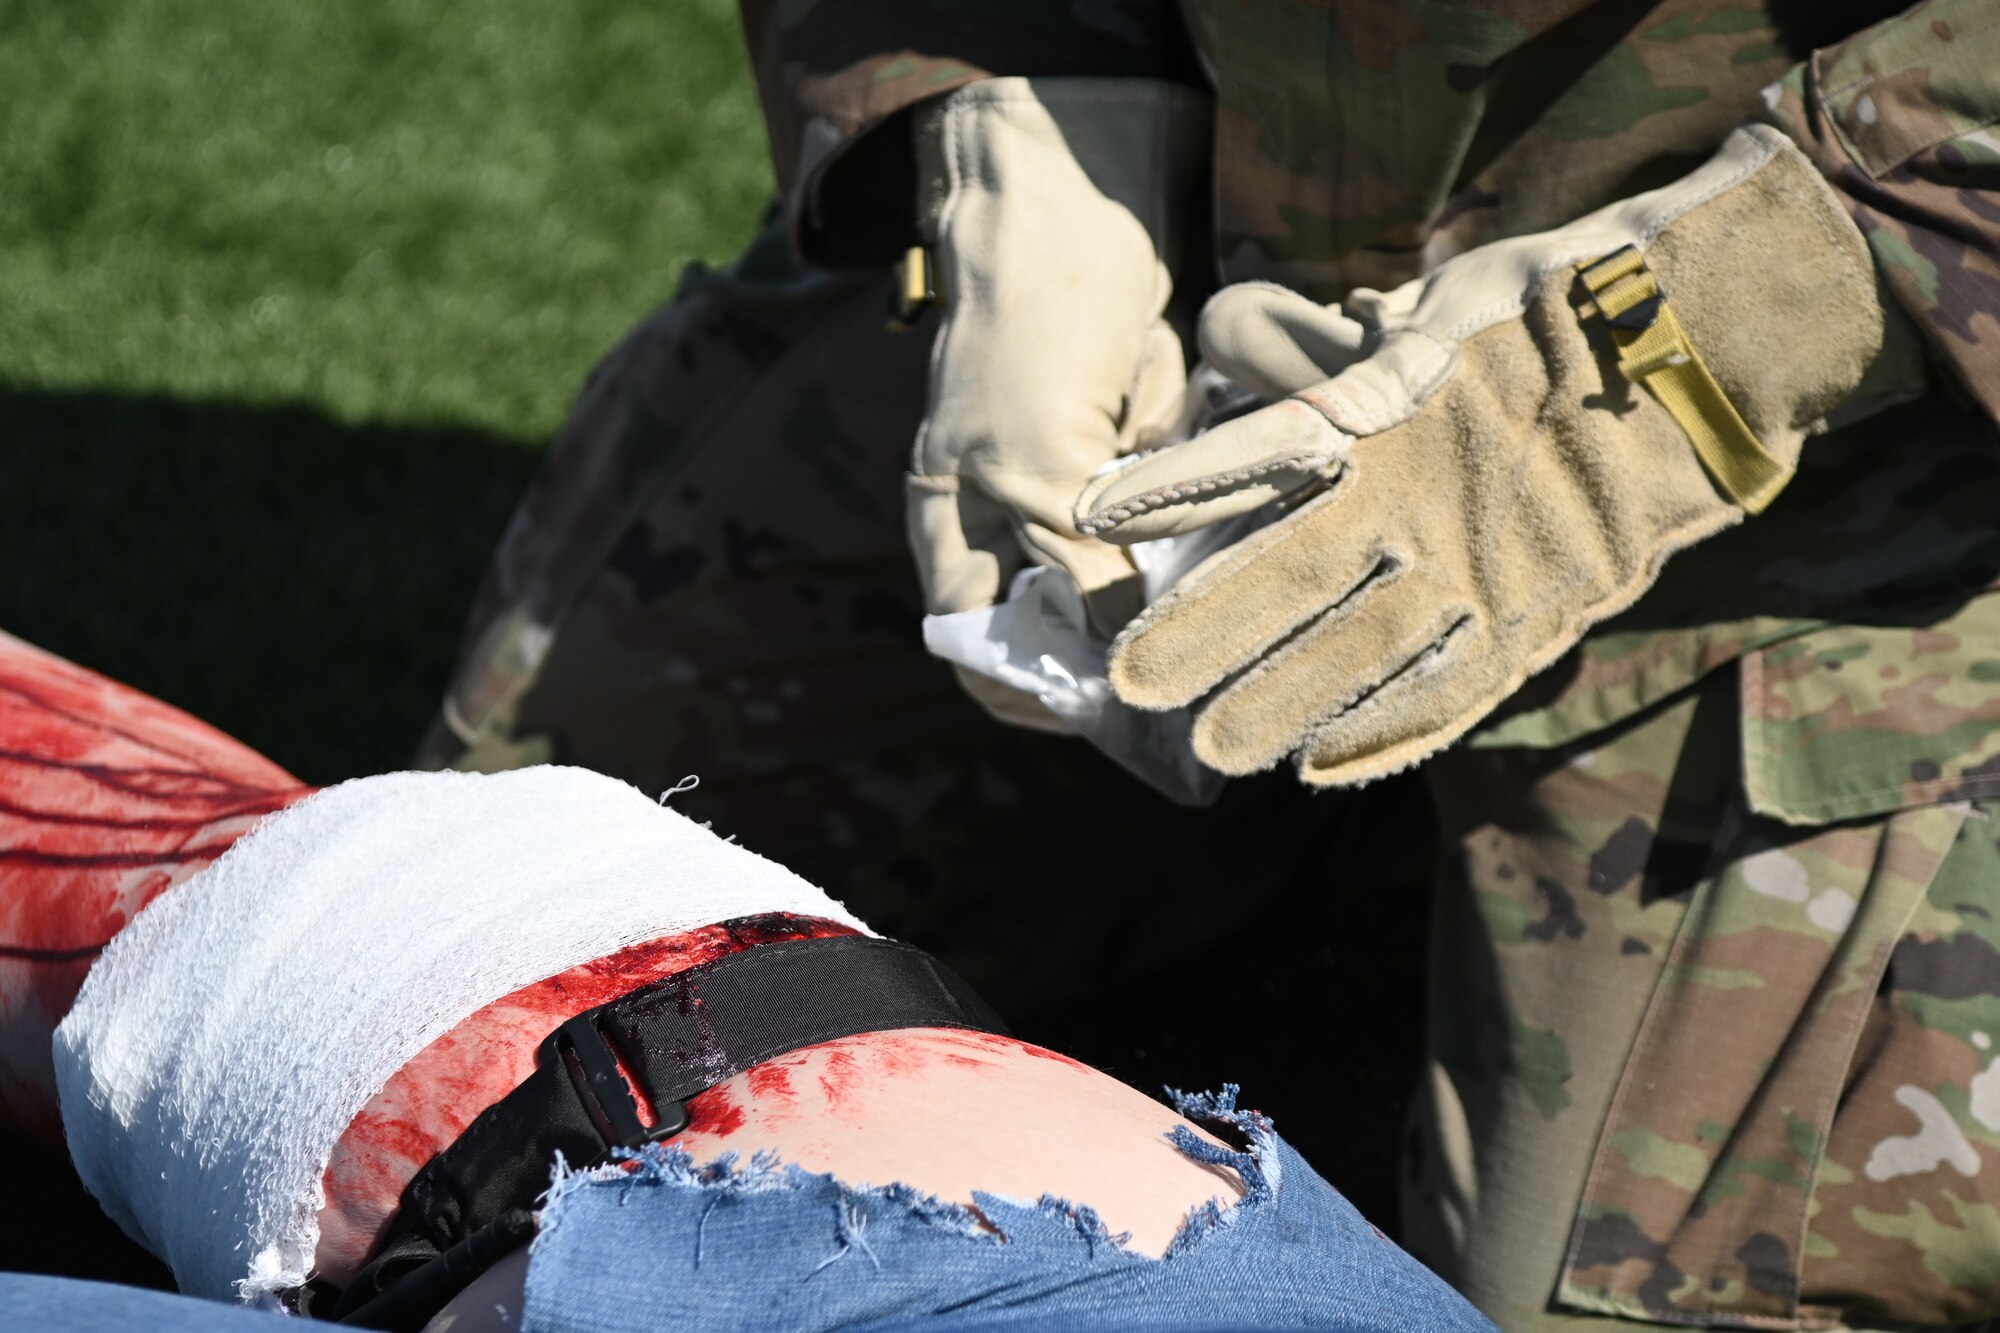 An Airman applies gauze to a simulated wound.